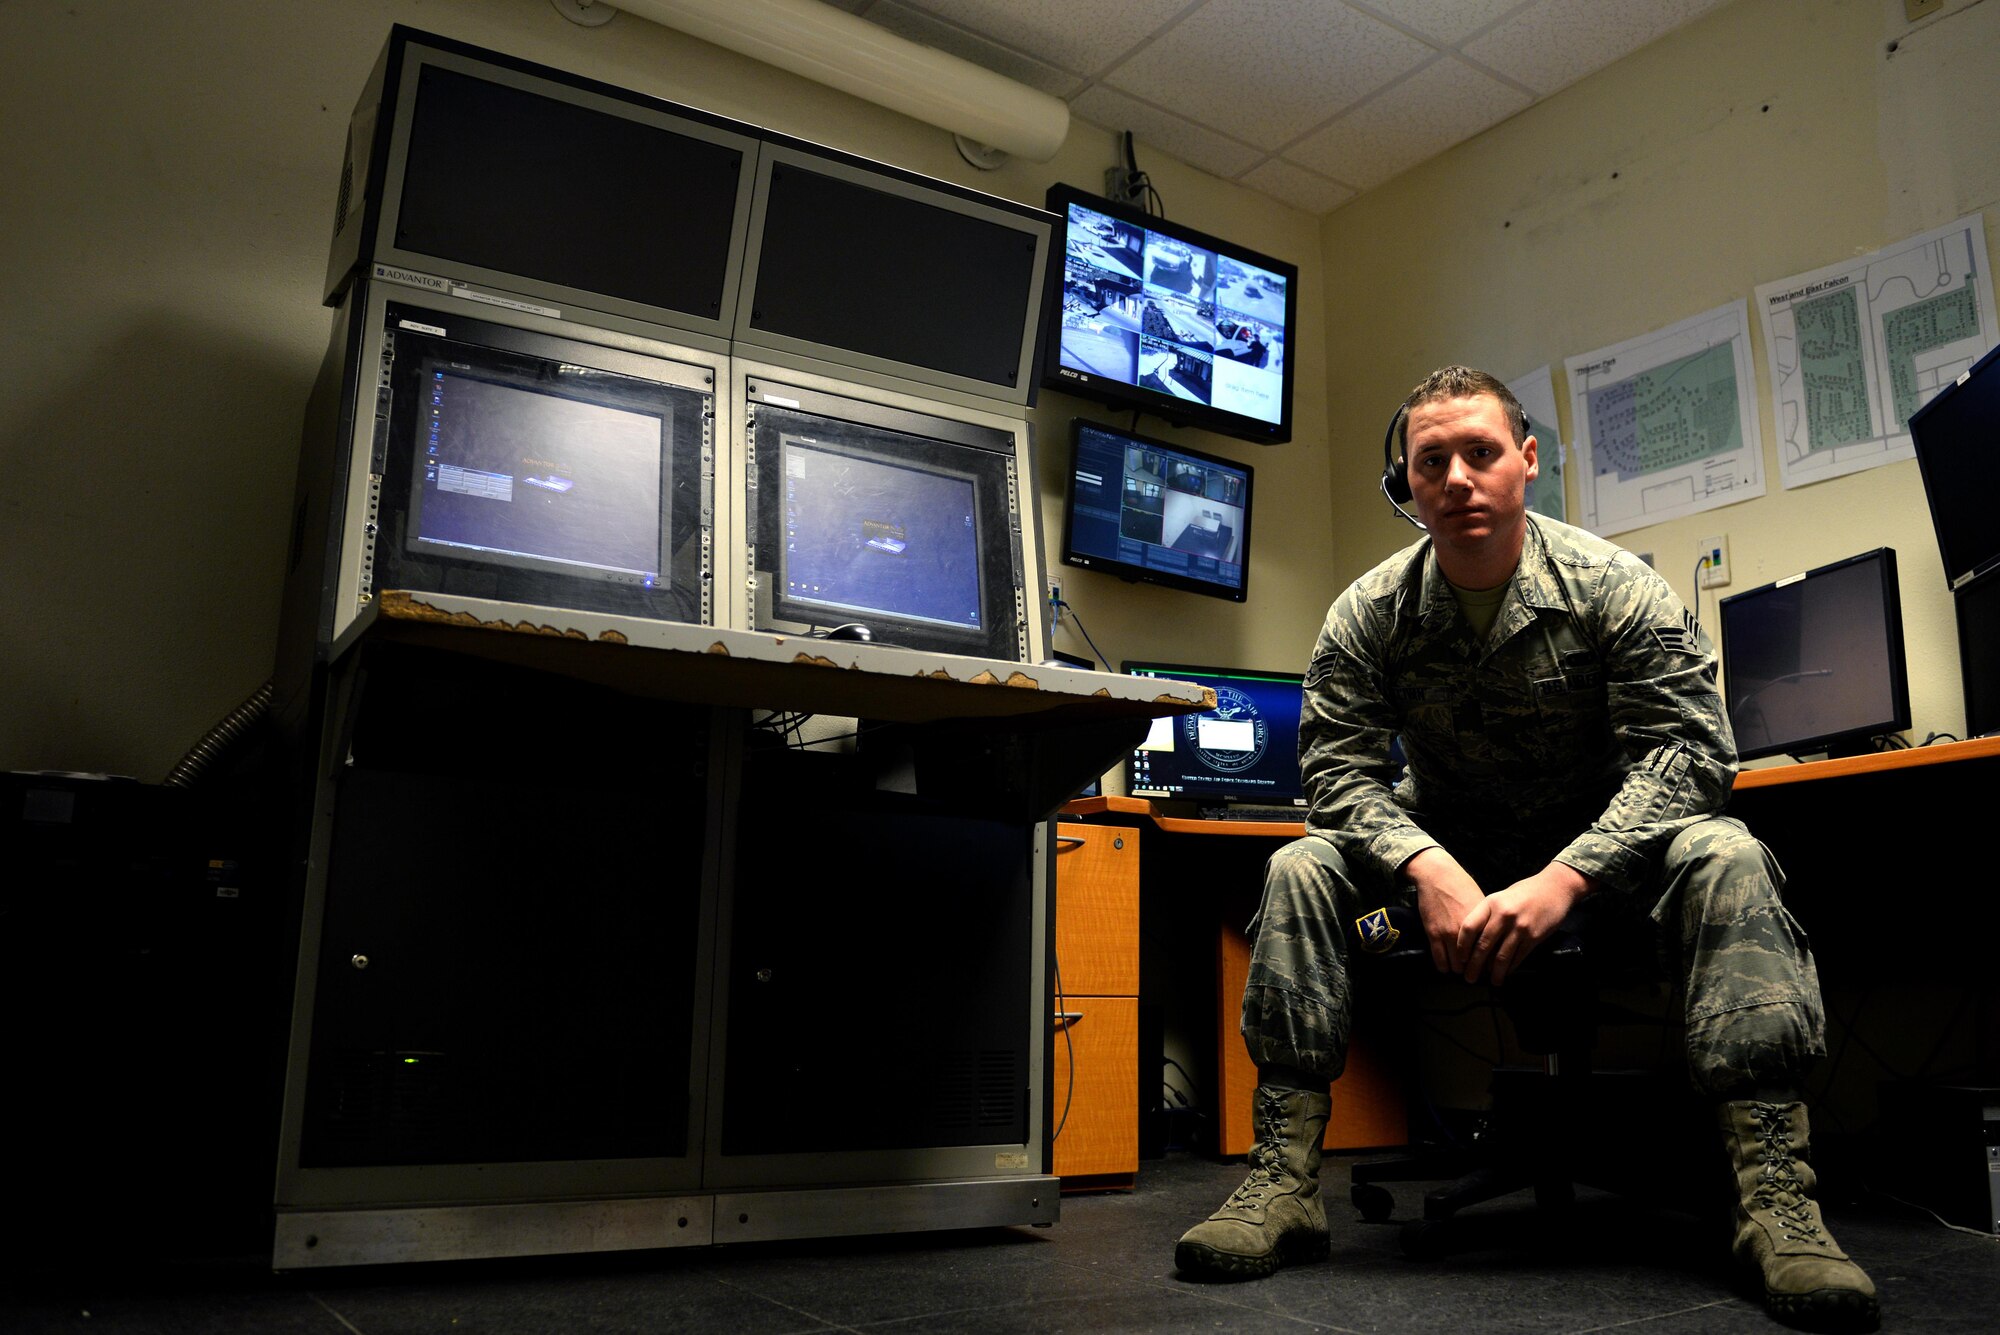 Senior Airman Douglas Sullivan, 81st Security Forces Squadron Base Defense Operations Center controller, poses for a photo in the alternate BDOC, Nov. 20, 2015, Keesler Air Force Base, Miss. Sullivan’s actions in helping a fellow Defender in a time of need exemplify what it means to be a wingman. (U.S. Air Force photo by Senior Airman Duncan McElroy)